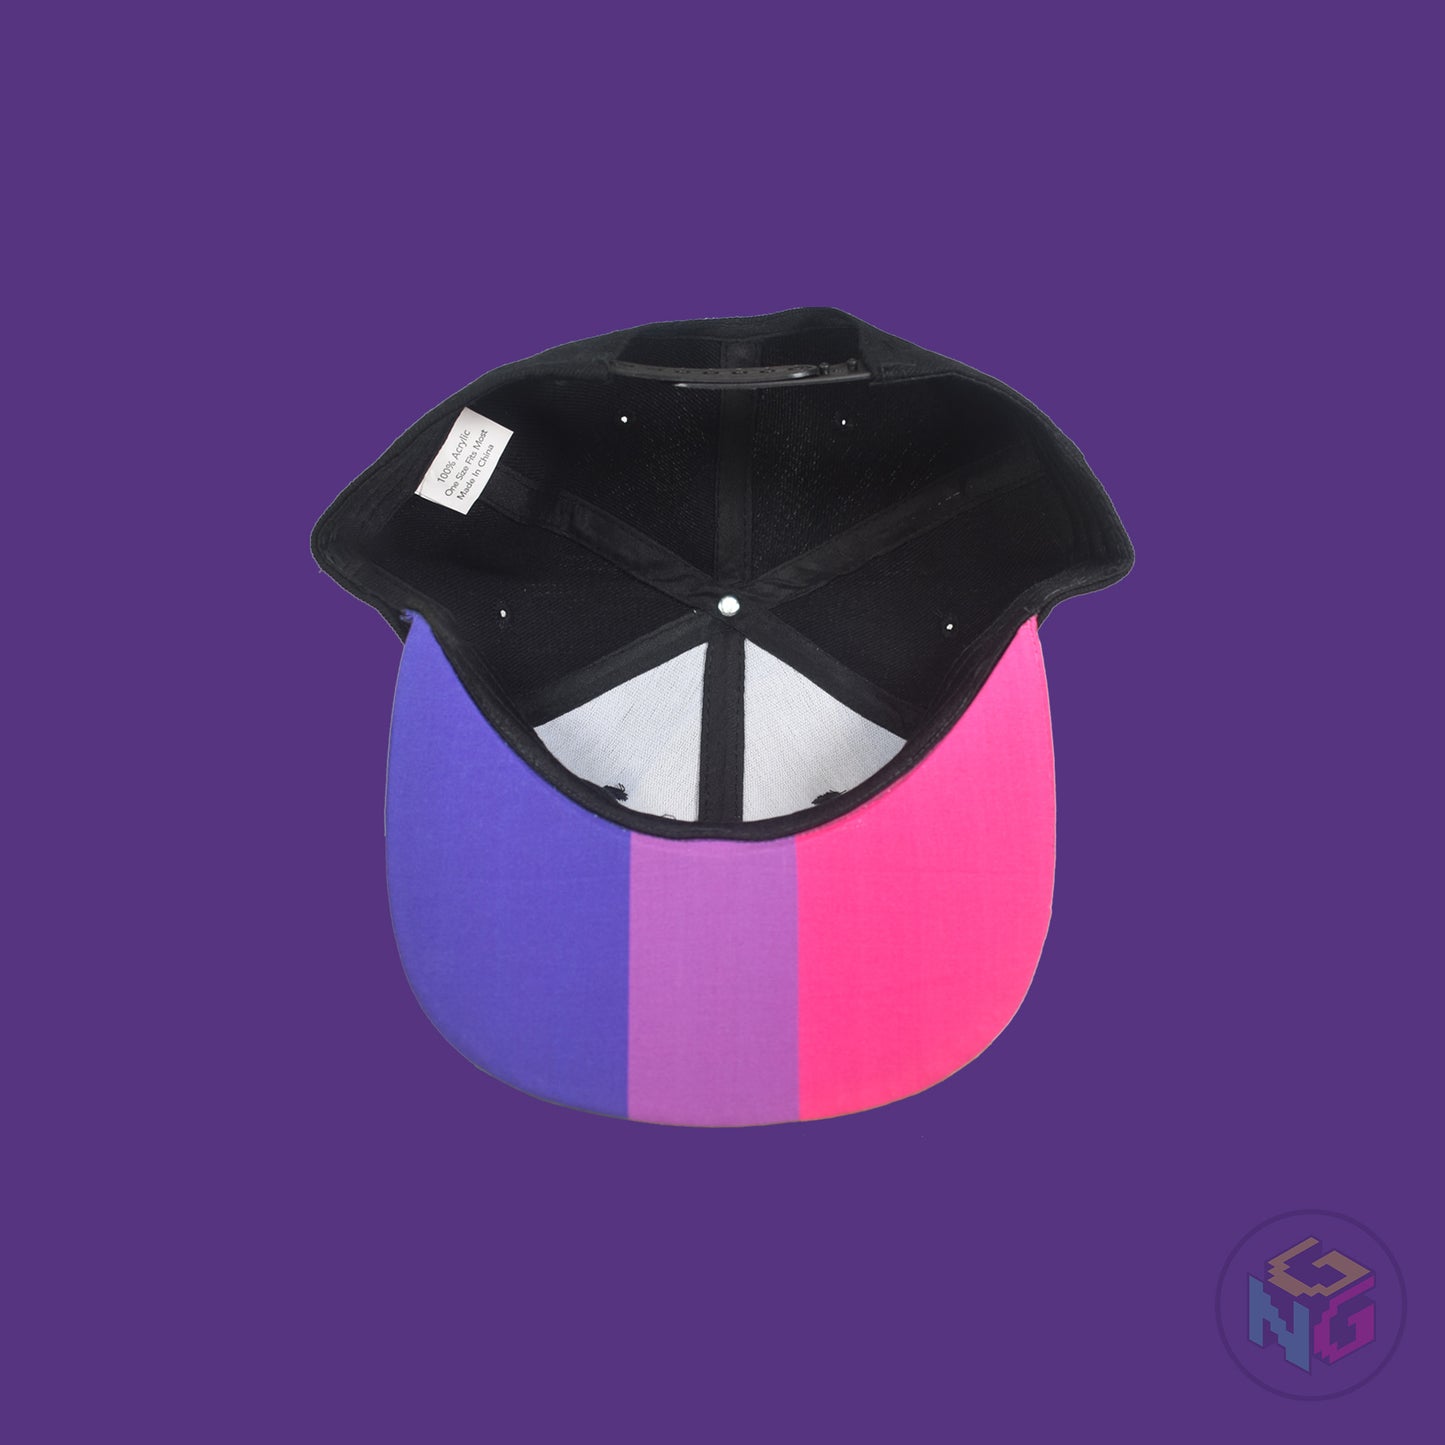 Black flat bill snapback hat. The brim has the bisexual pride flag on both sides and the front of the hat has the word “BI” in pink and blue. Underside view